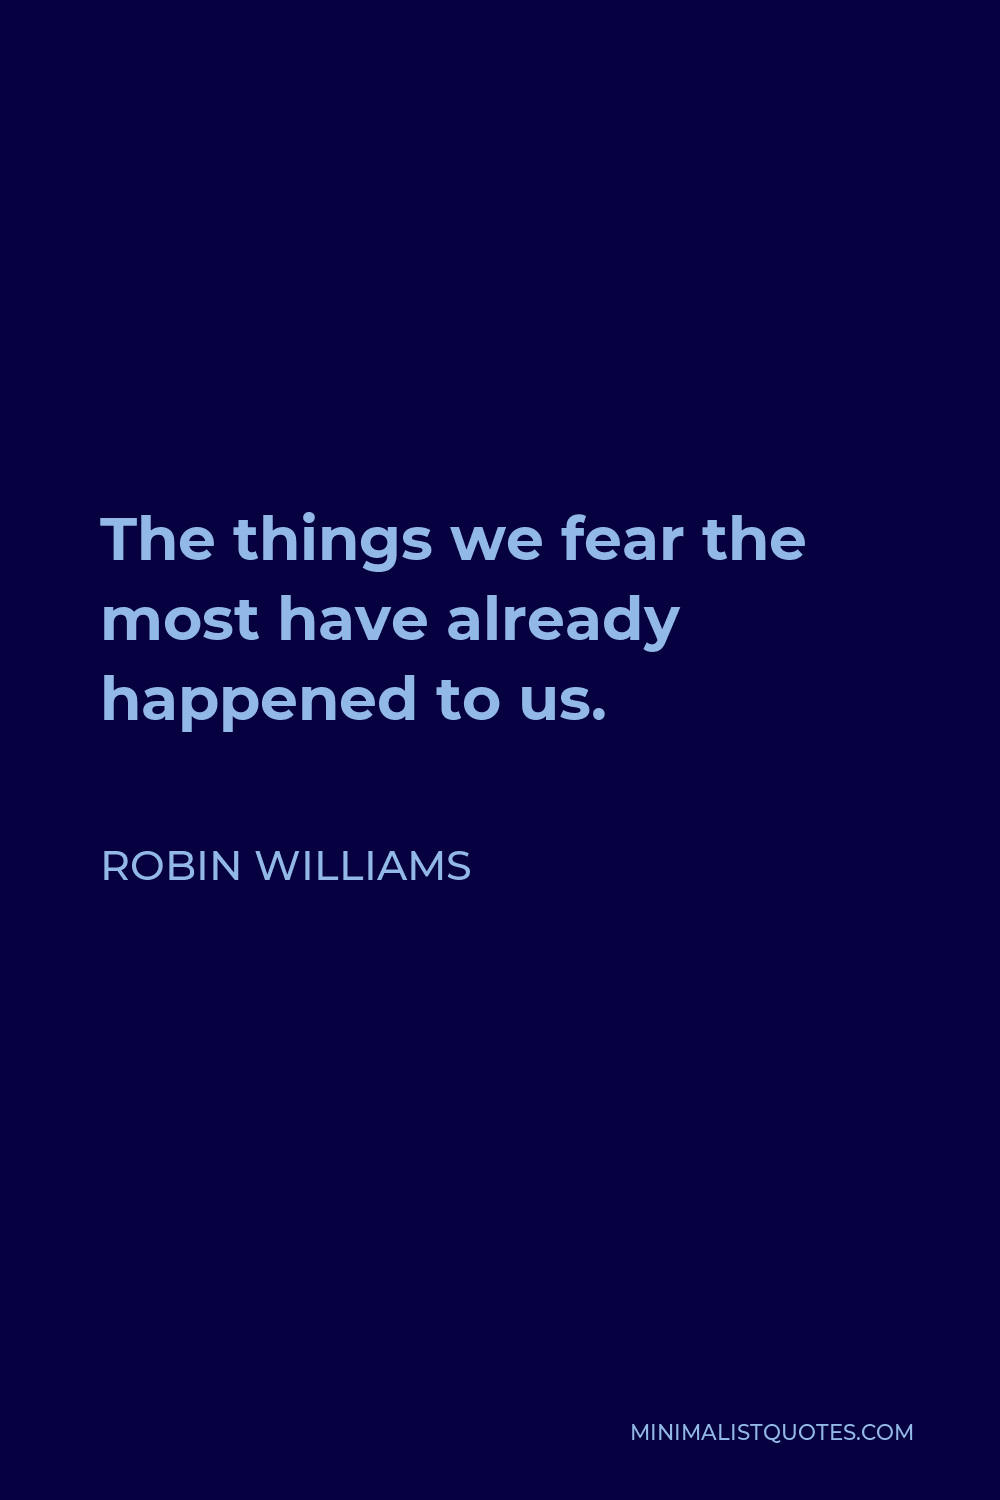 Robin Williams Quote - The things we fear the most have already happened to us.